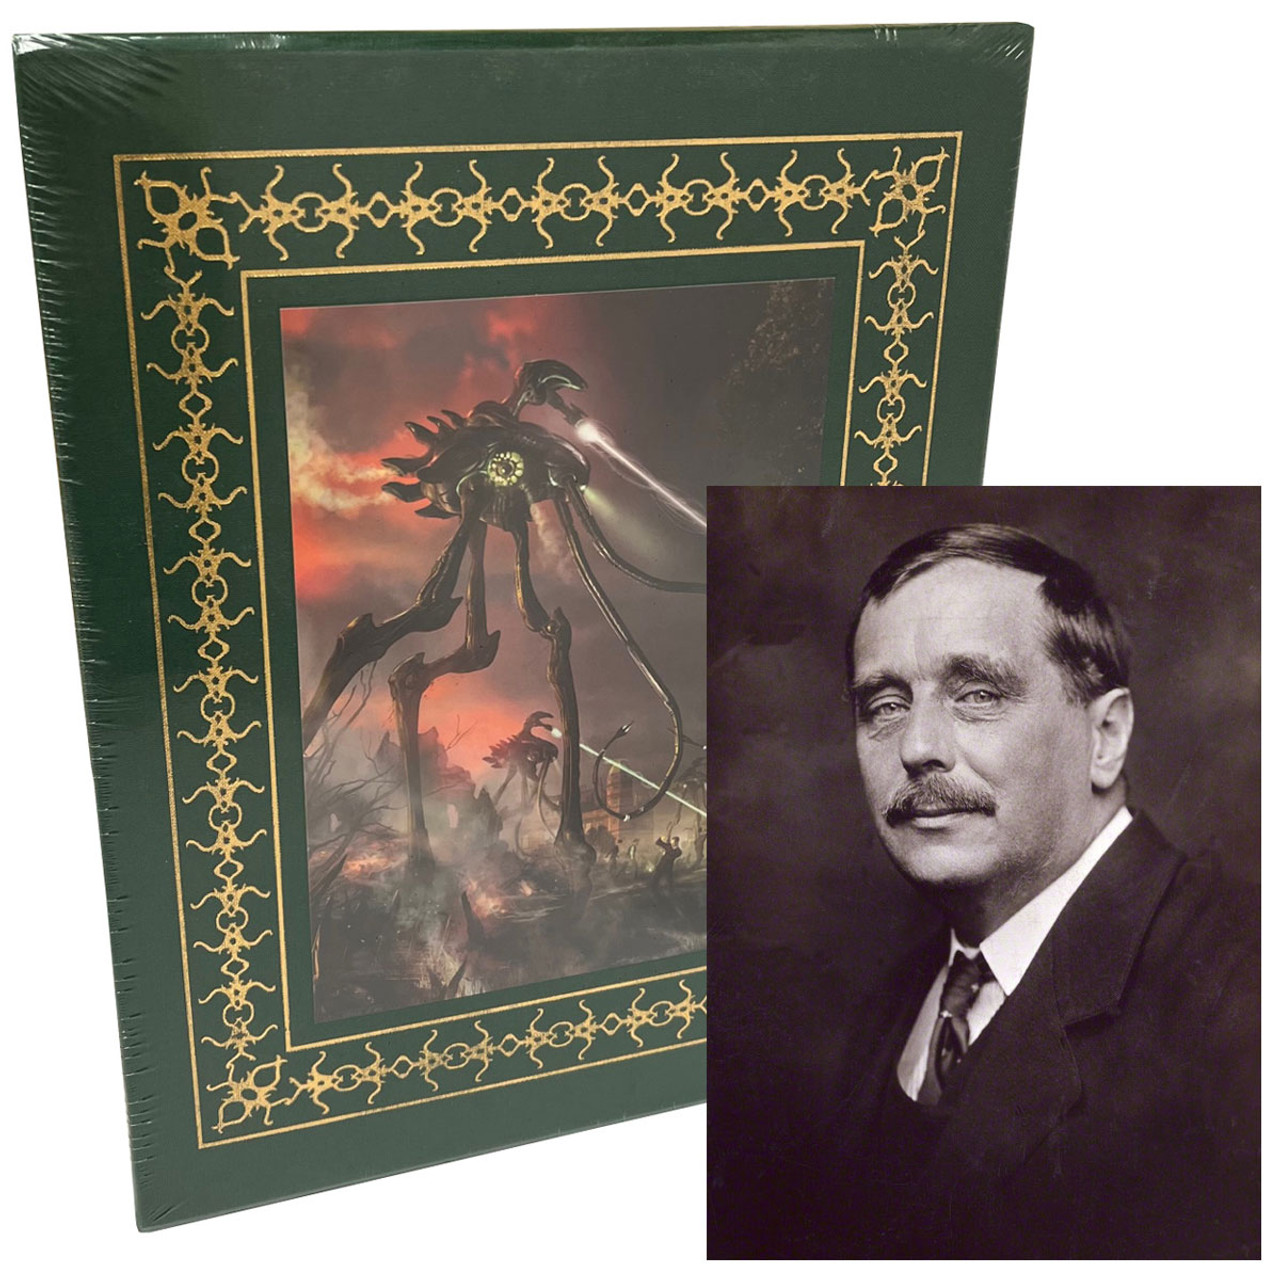 H.G. Wells "The War Of The Worlds" Slipcased Deluxe Signed Artist Edition, Leather Bound Collector's Edition of 1,200 w/COA [Sealed]